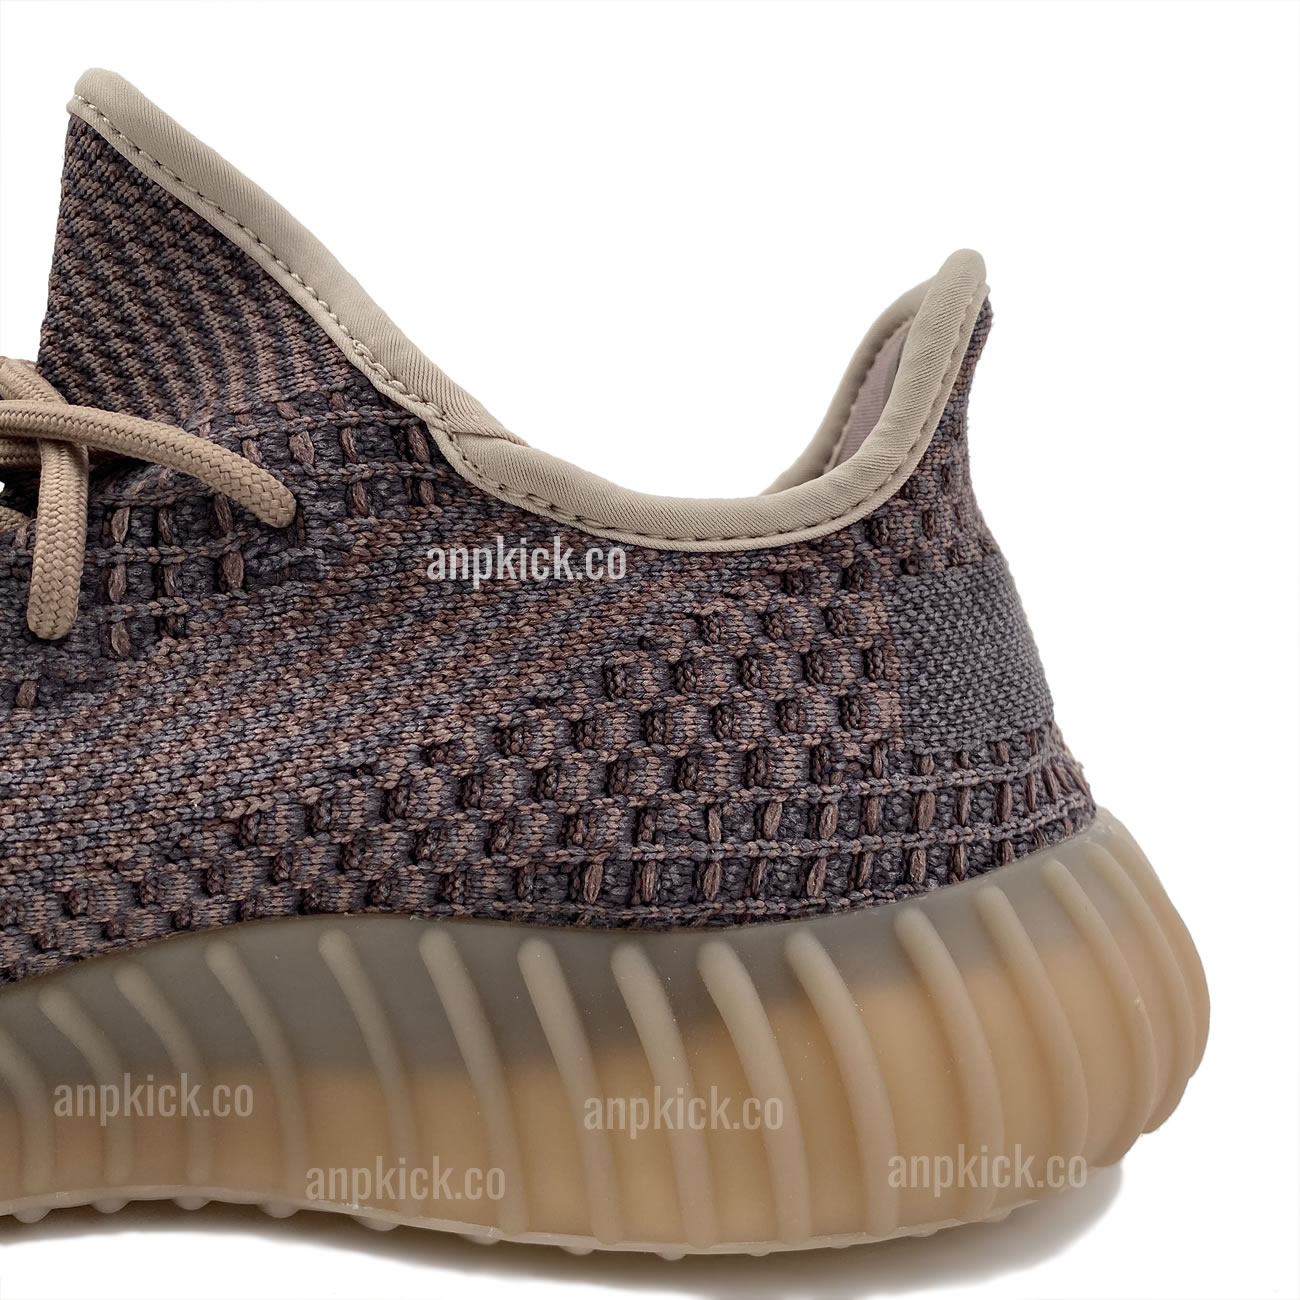 Adidas Yeezy Boost 350 V2 Yecher Ho2795 New Release Date First Look (8) - www.newkick.org